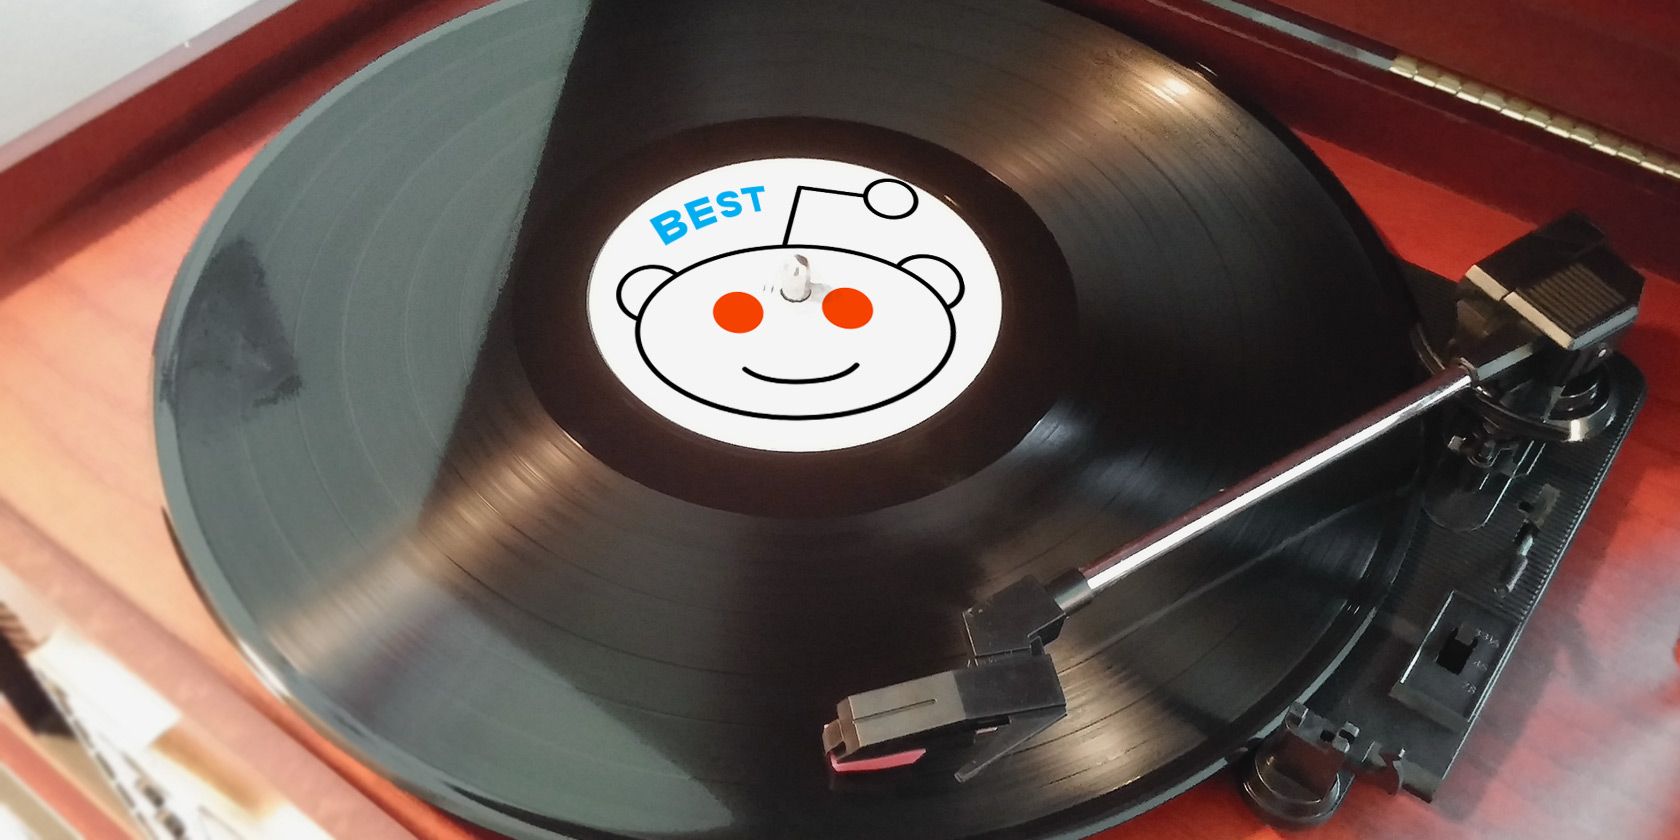 where to download albums reddit